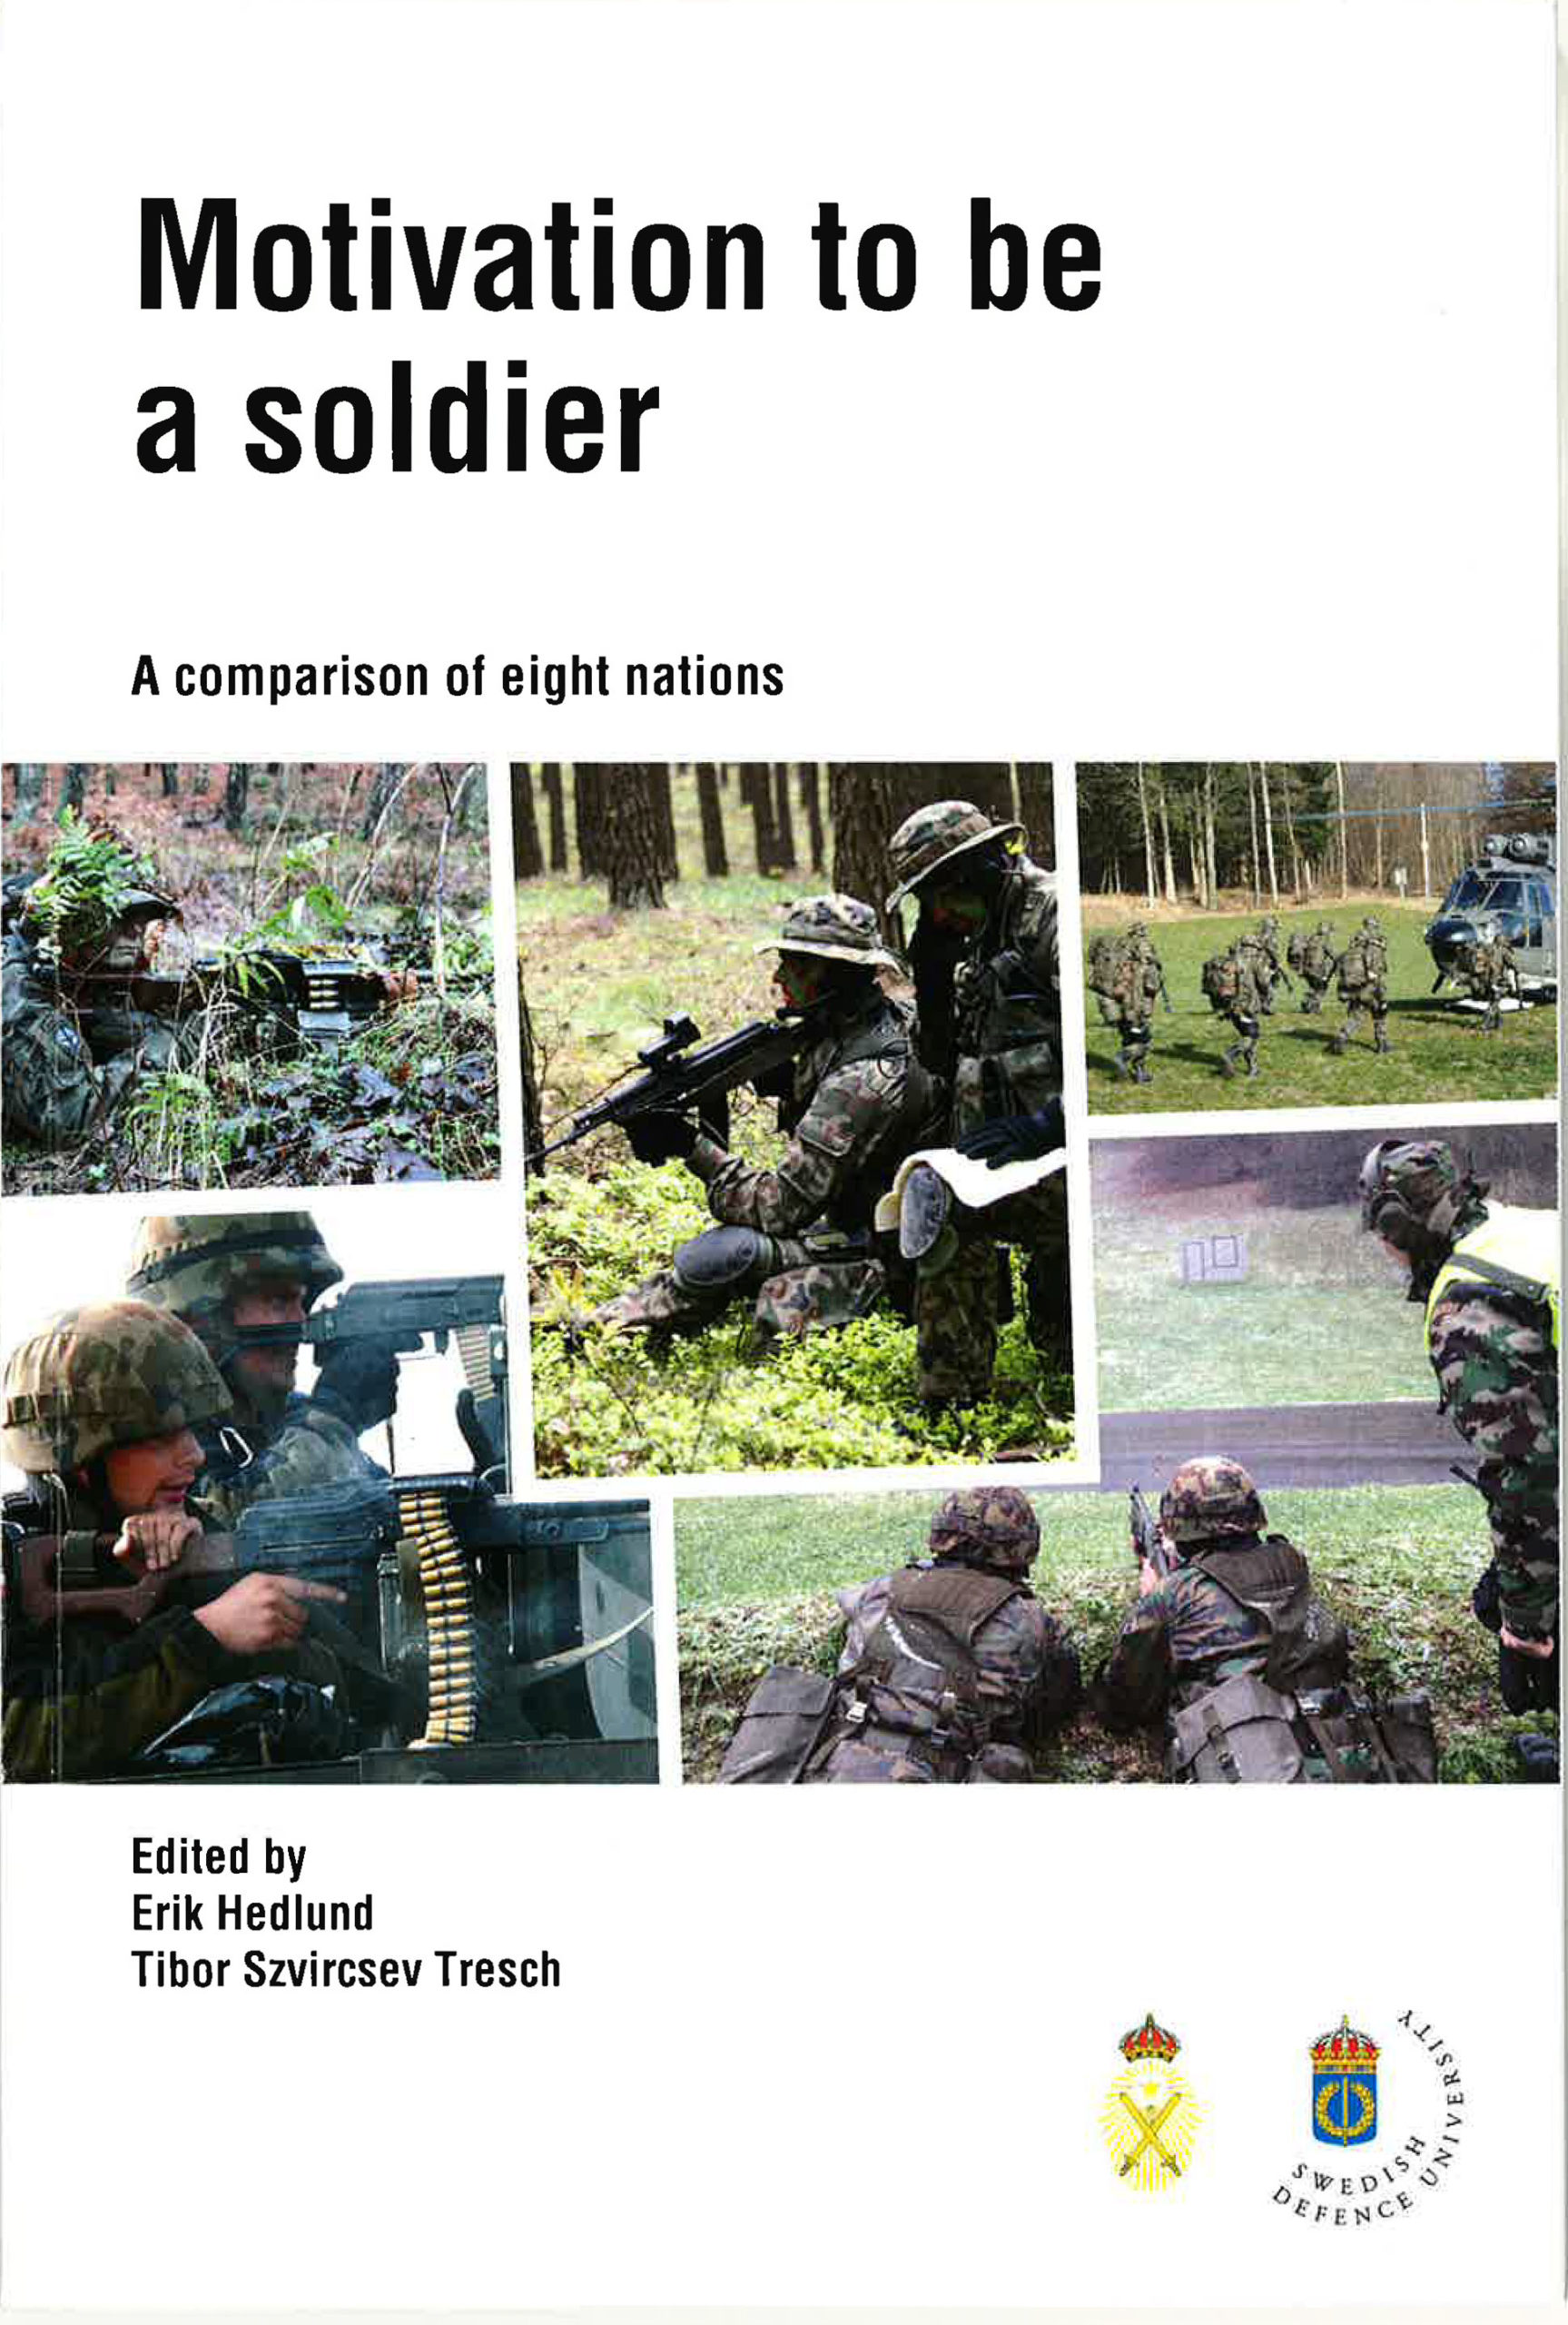 Motivation to be a soldier – a comparison of eight nations